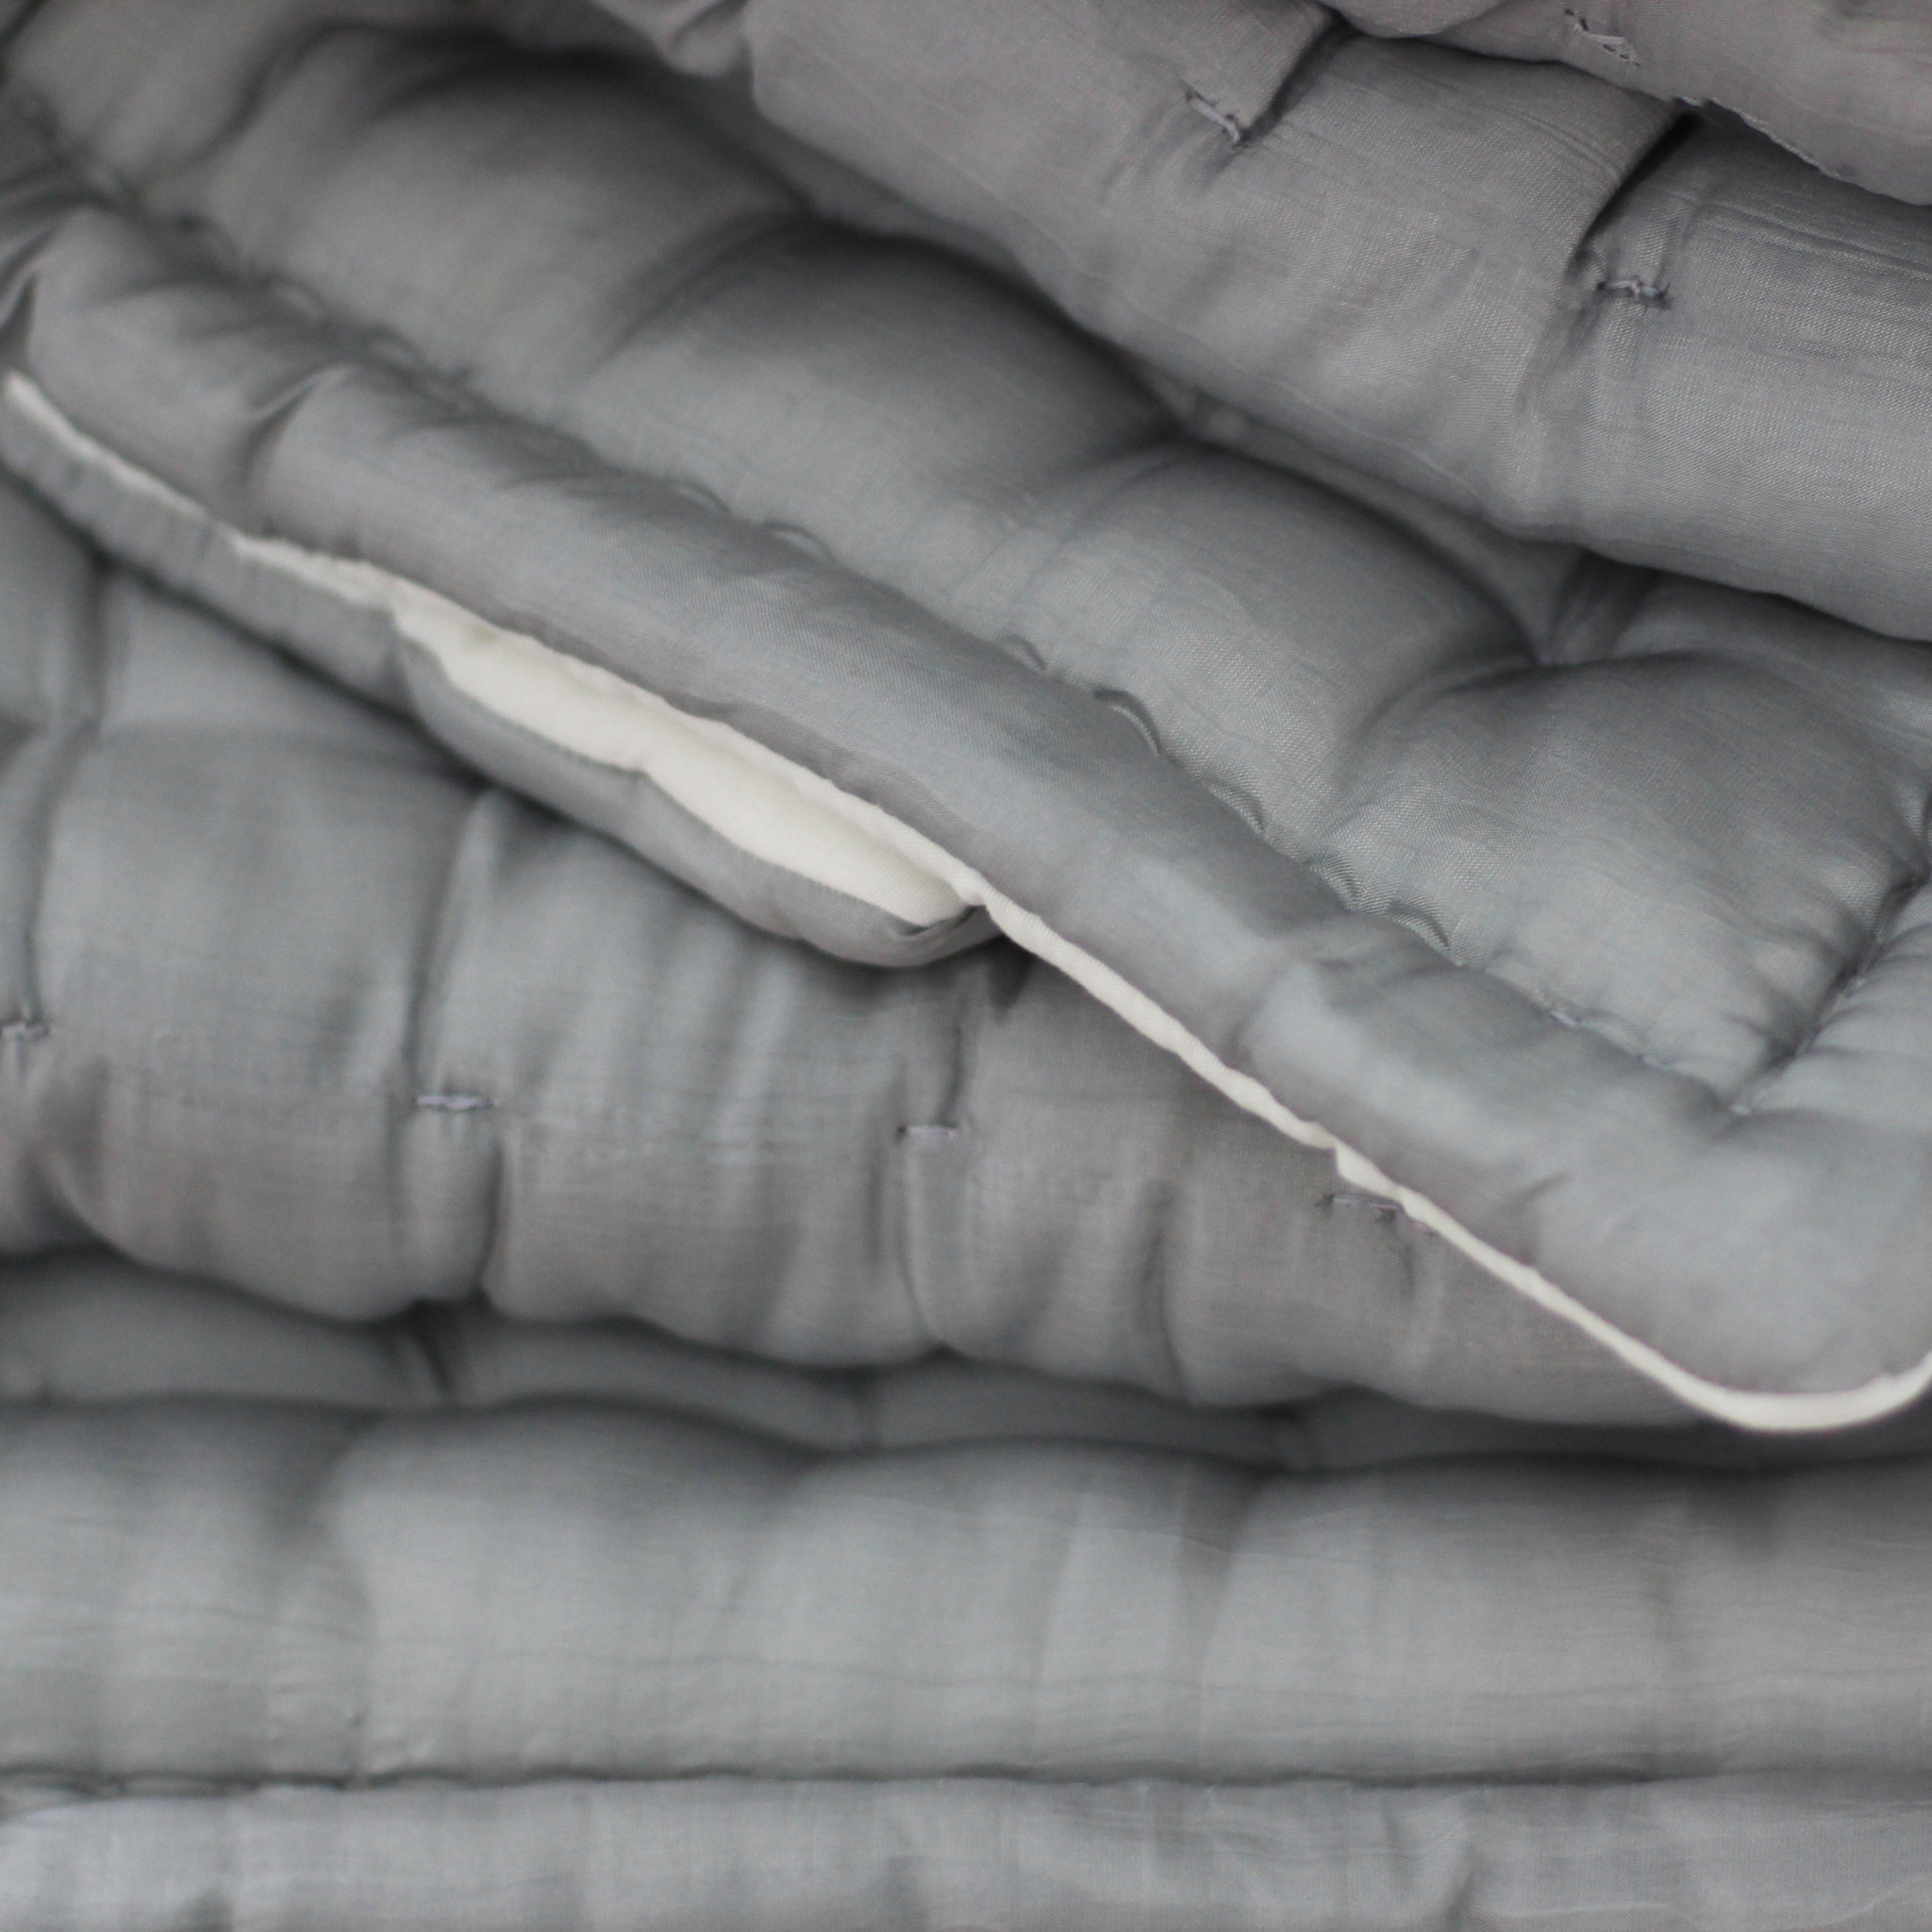 Mulberry Silk Quilt and Shams - Silk Comforter Set - Box Hand Stitched by artisans-Gray